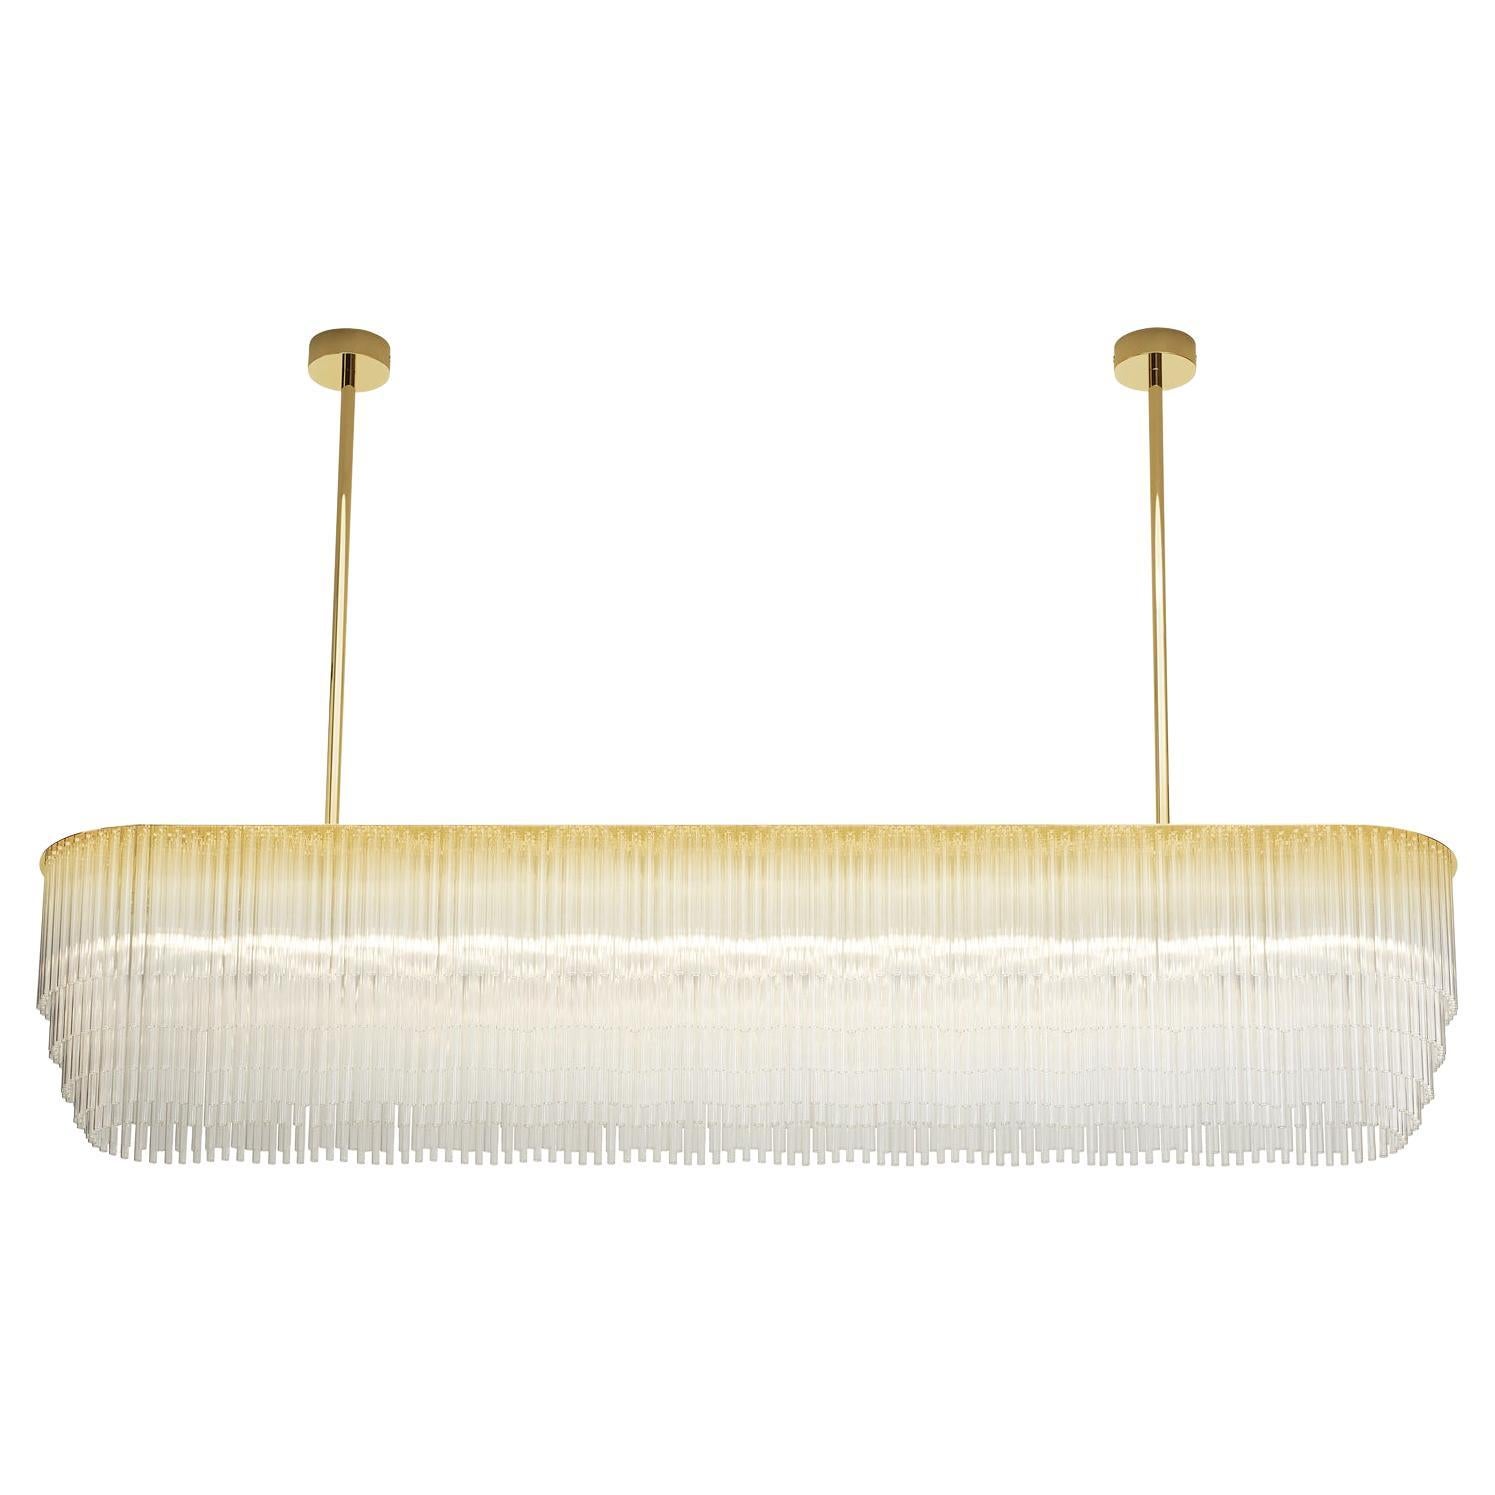 Linear Chandelier 1261mm / 25.75" in Polished Brass with Tiered Glass Profile For Sale